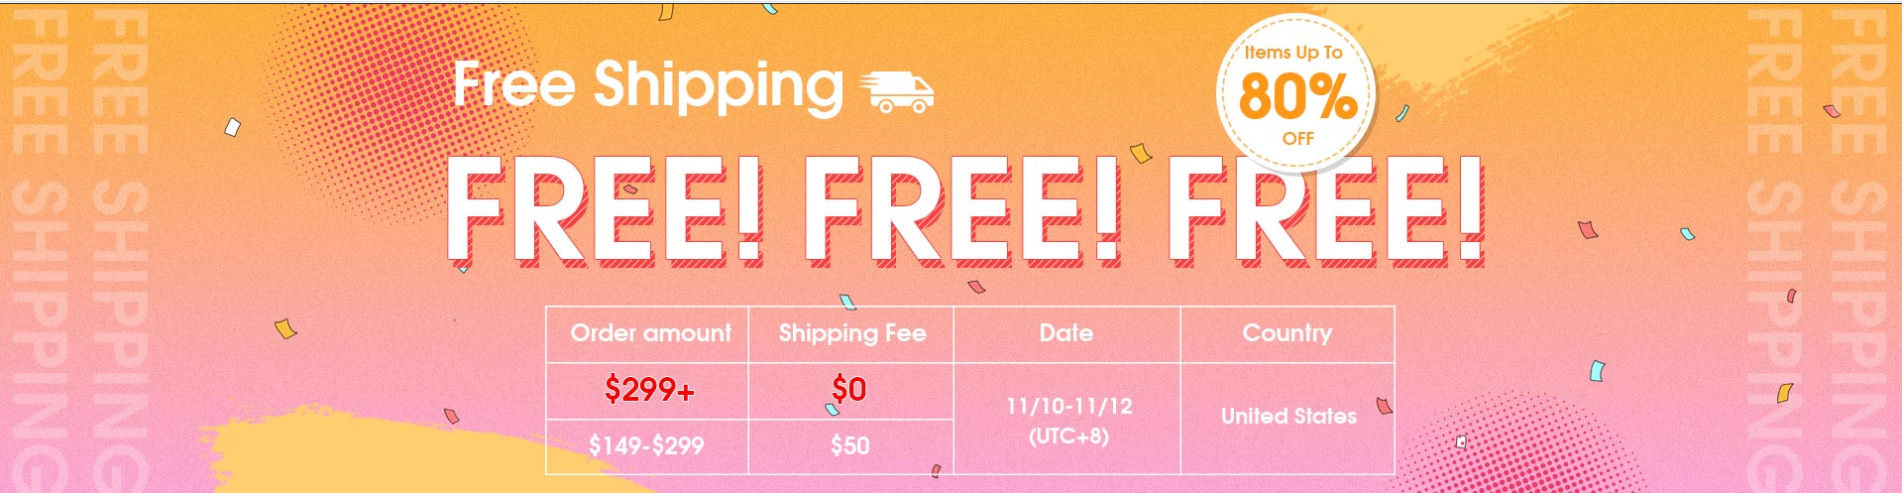 Free Shipping Activities